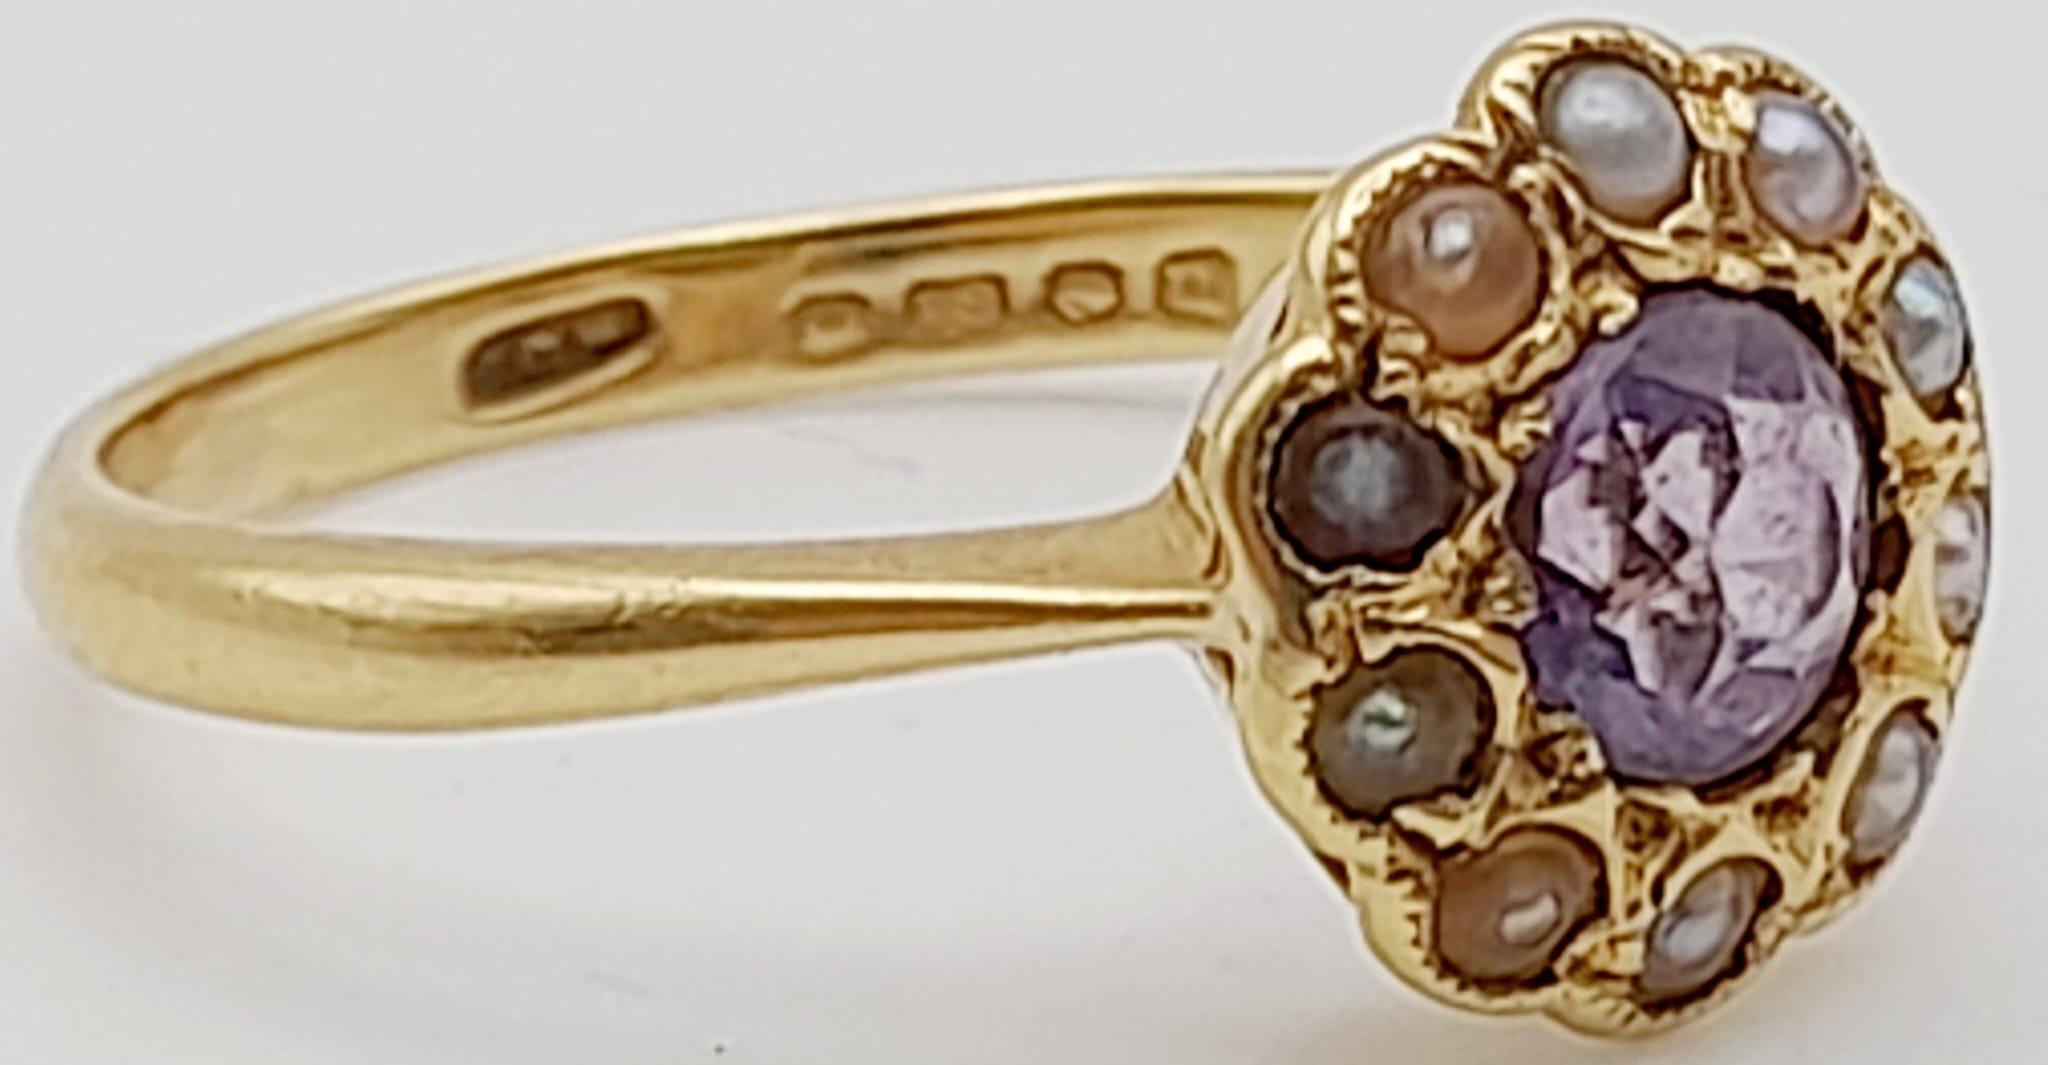 A Vintage 18K Yellow Gold Amethyst and Opal Ring. Central amethyst with a halo of small opals. - Image 5 of 7